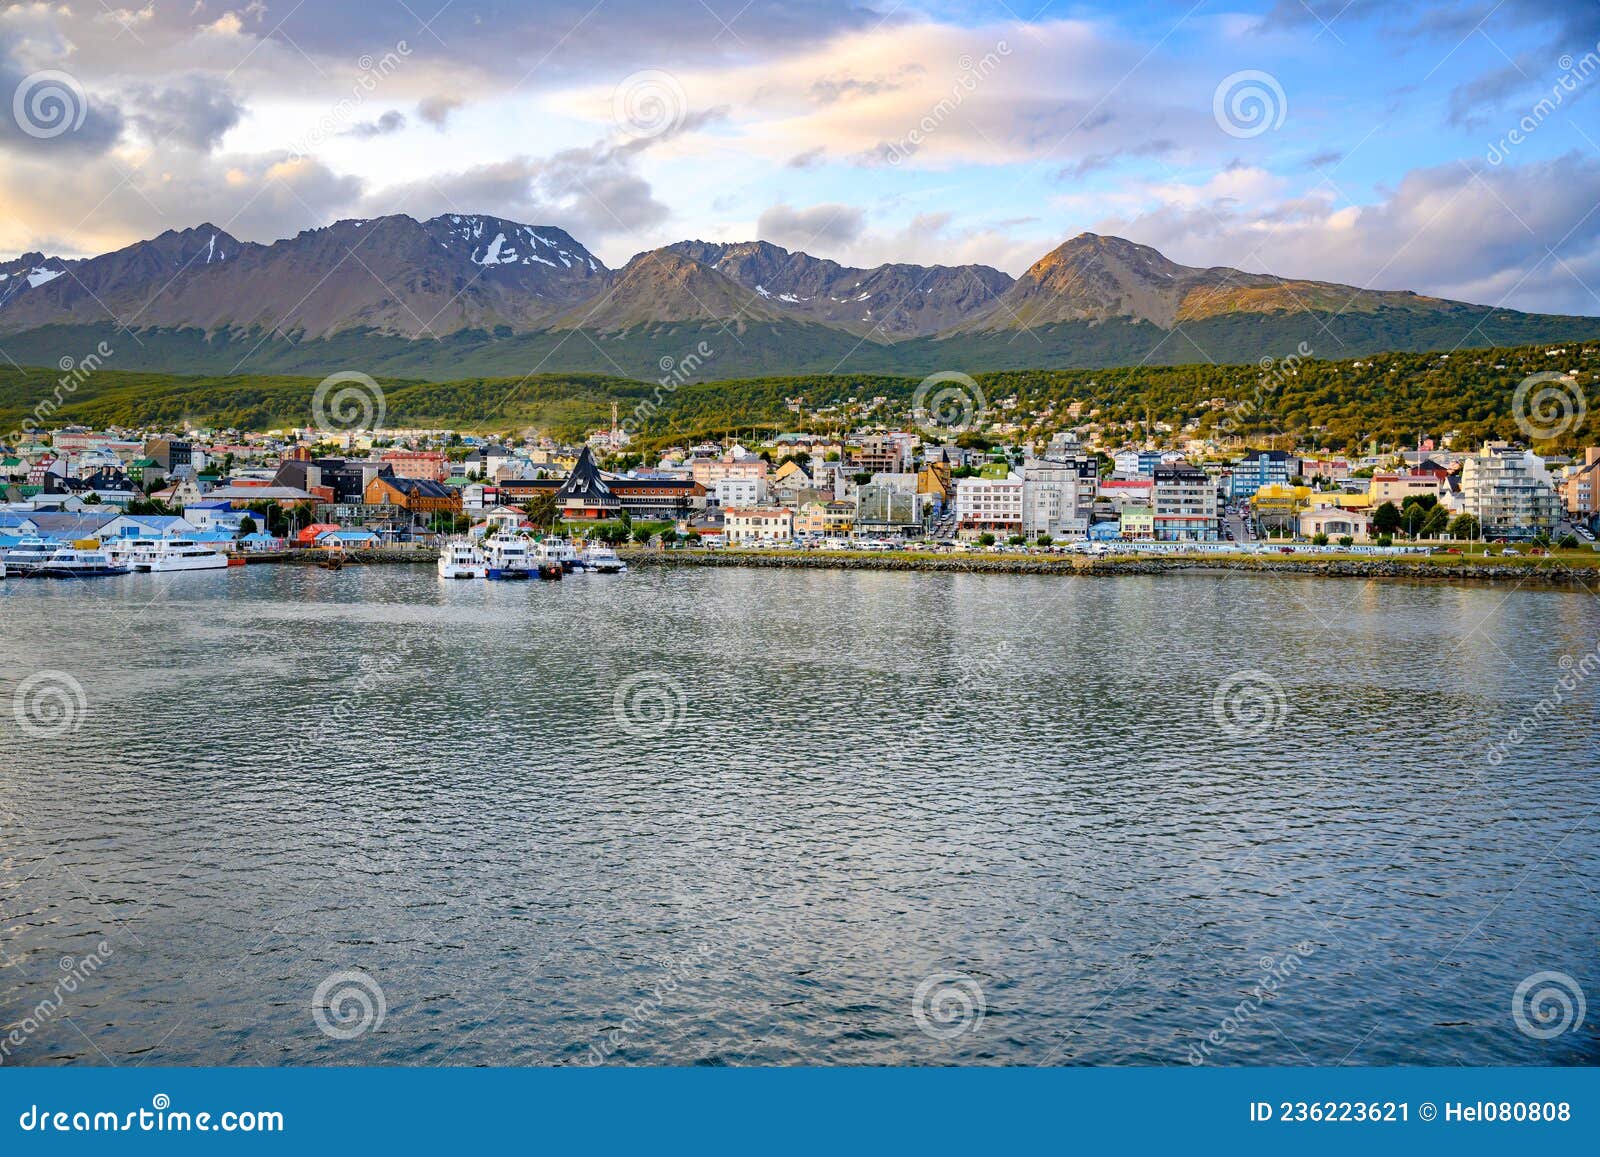 ushuaia, colorful houses, beautiful mountains and sea, ccapaital of tierra del fuego, patagonia, argentina